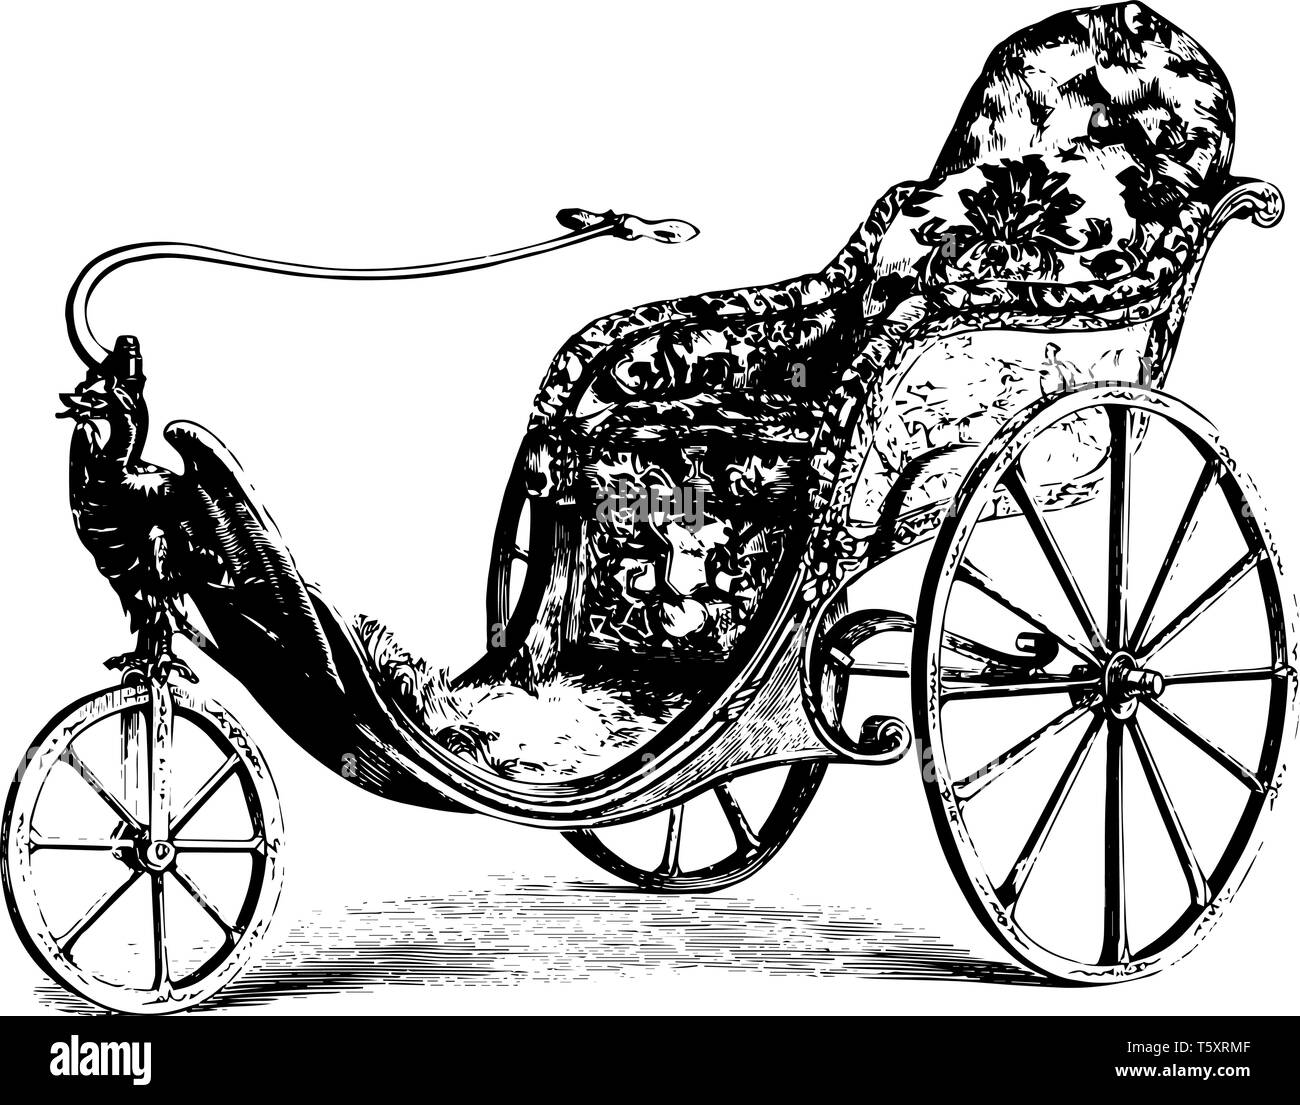 Wheelchair designed with one small wheel in front and two big wheels at back along with maneuvering handle, vintage line drawing or engraving illustra Stock Vector